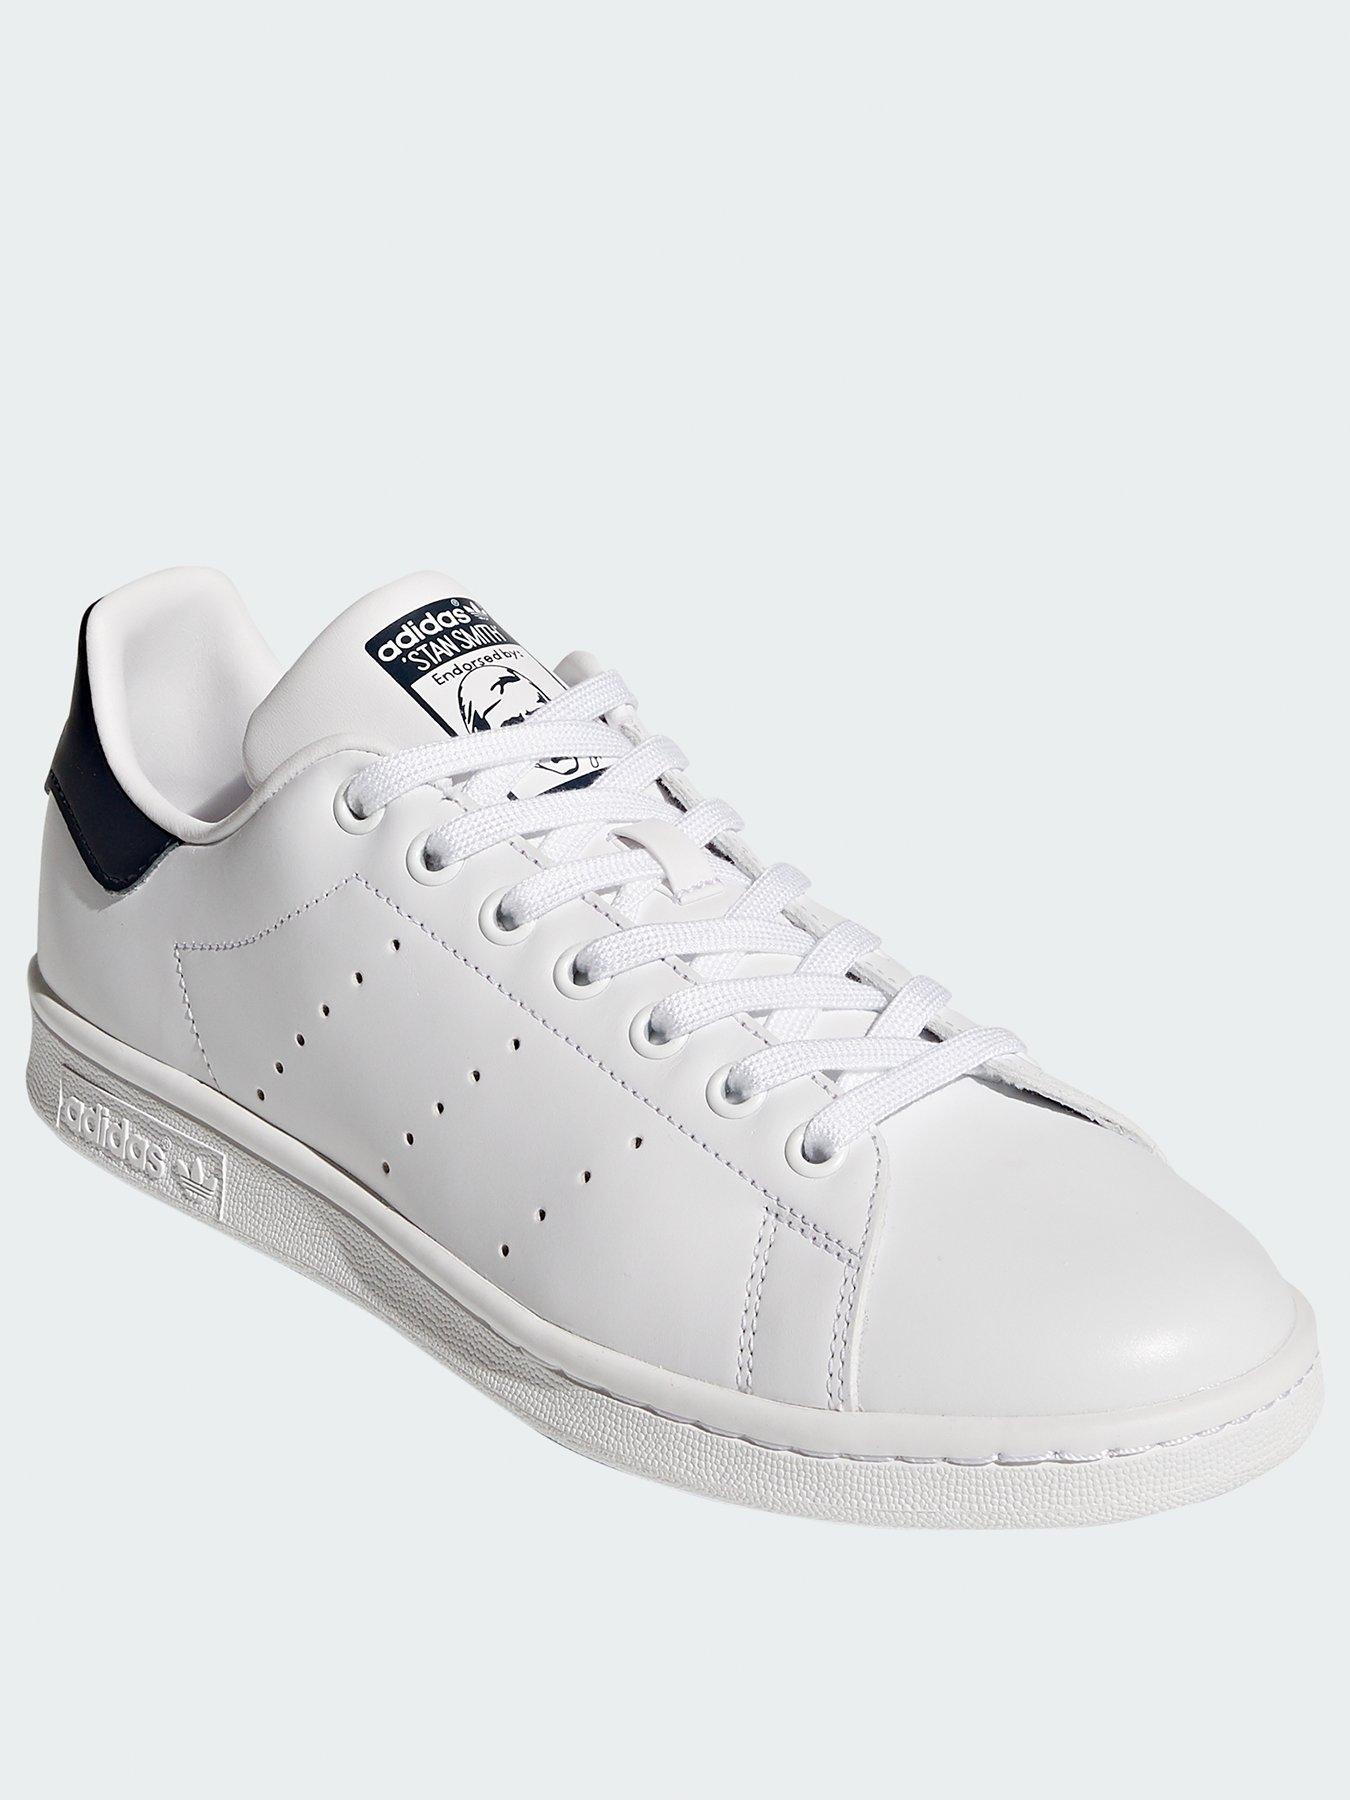 adidas navy mens trainers